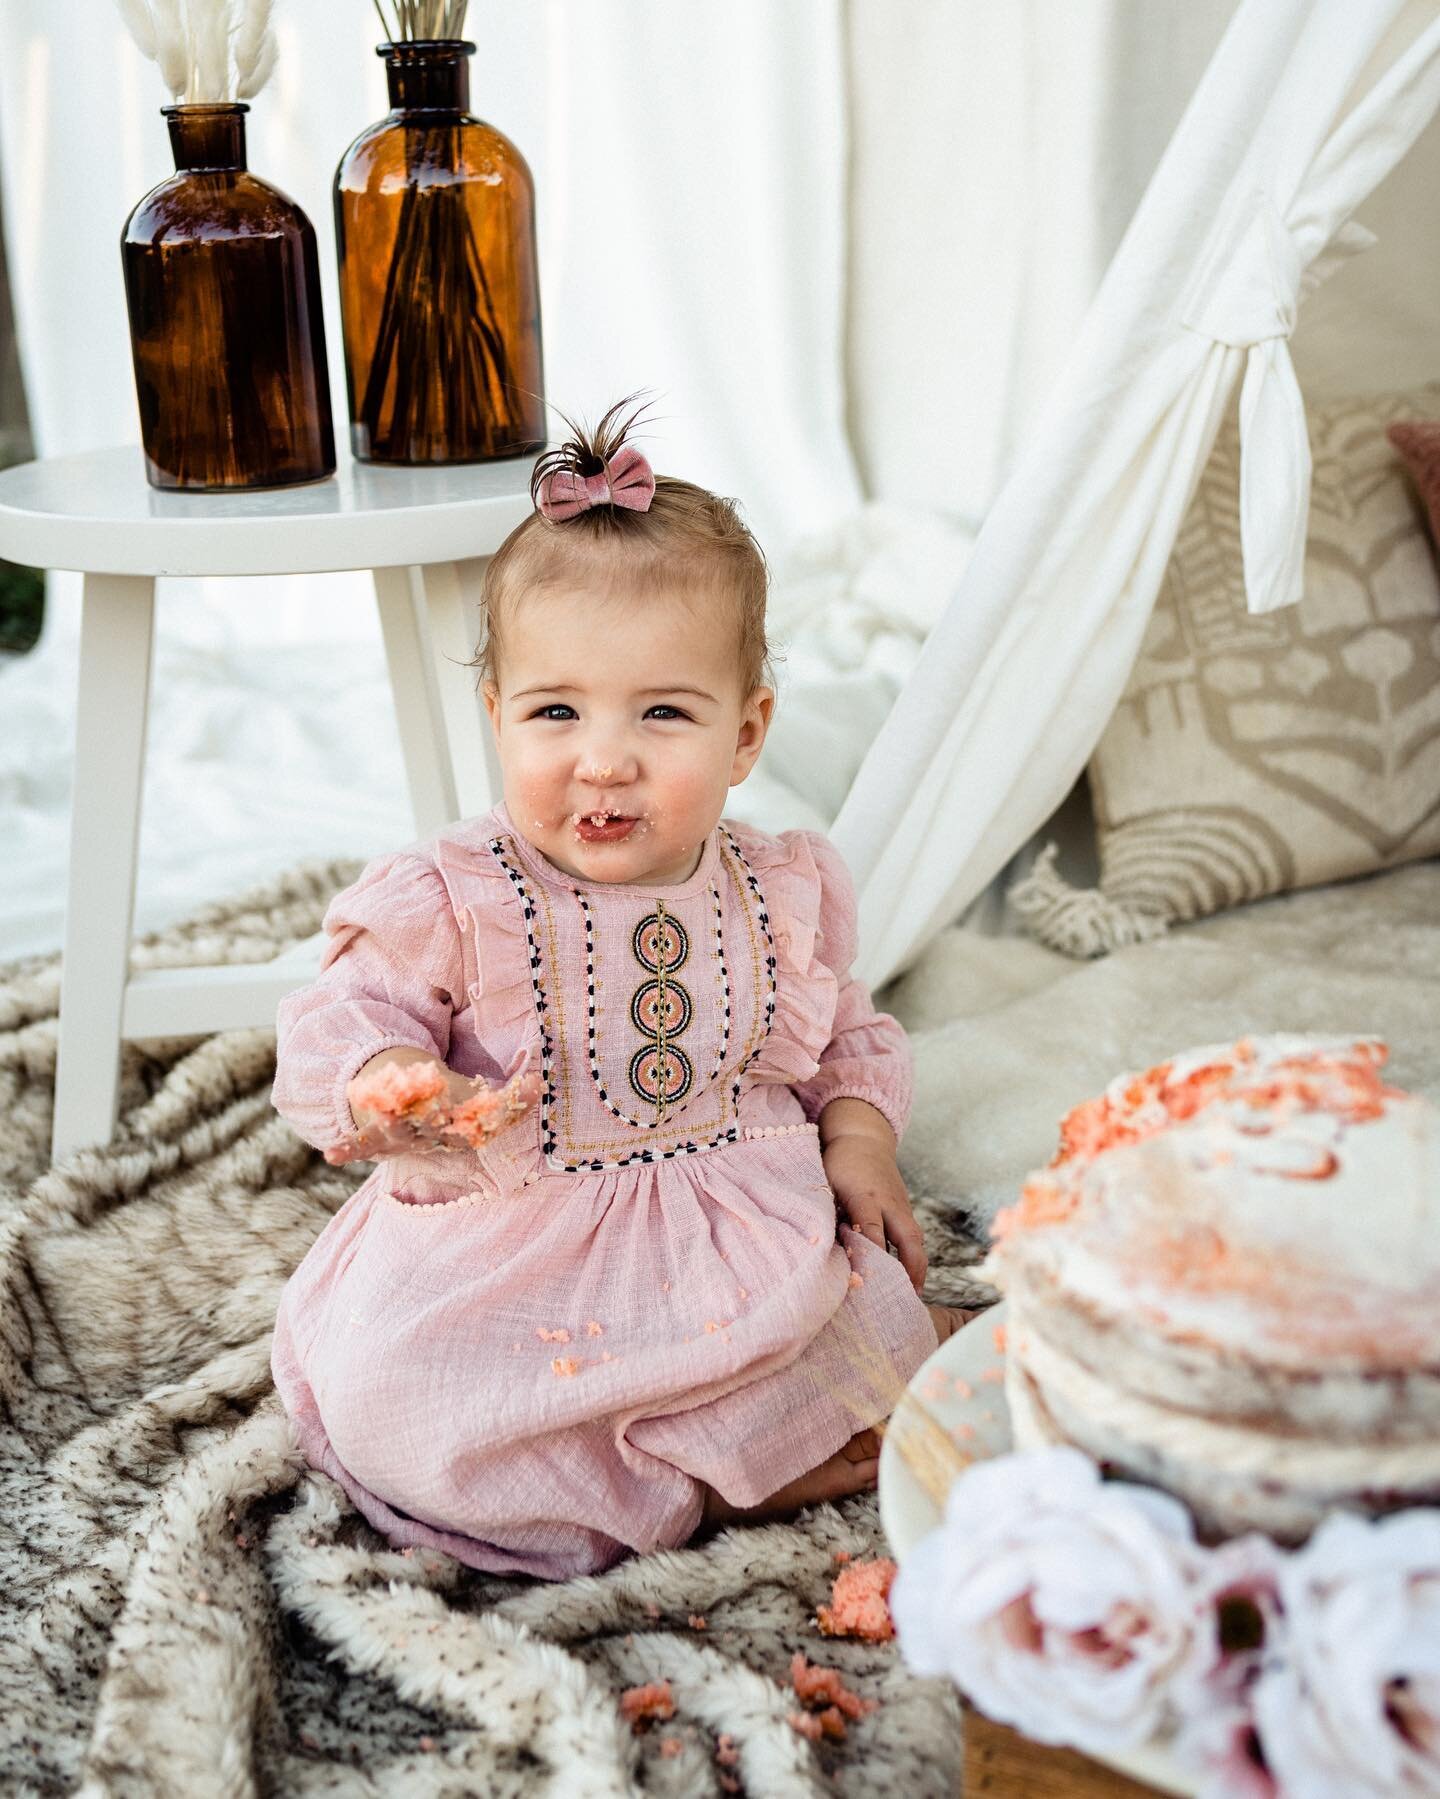 When that first bday cake tastes gewd and it&rsquo;s all for you.😍😂💕⁣
⁣
The hand on the hip in the second photo is my fave.😭 ⁣
⁣
Cute setup, cake, &amp; baby credit: @melodychildress 
⁣
⁣
⁣
⁣
⁣
#cakesmash #cakesmashphotography #portraitphotograph